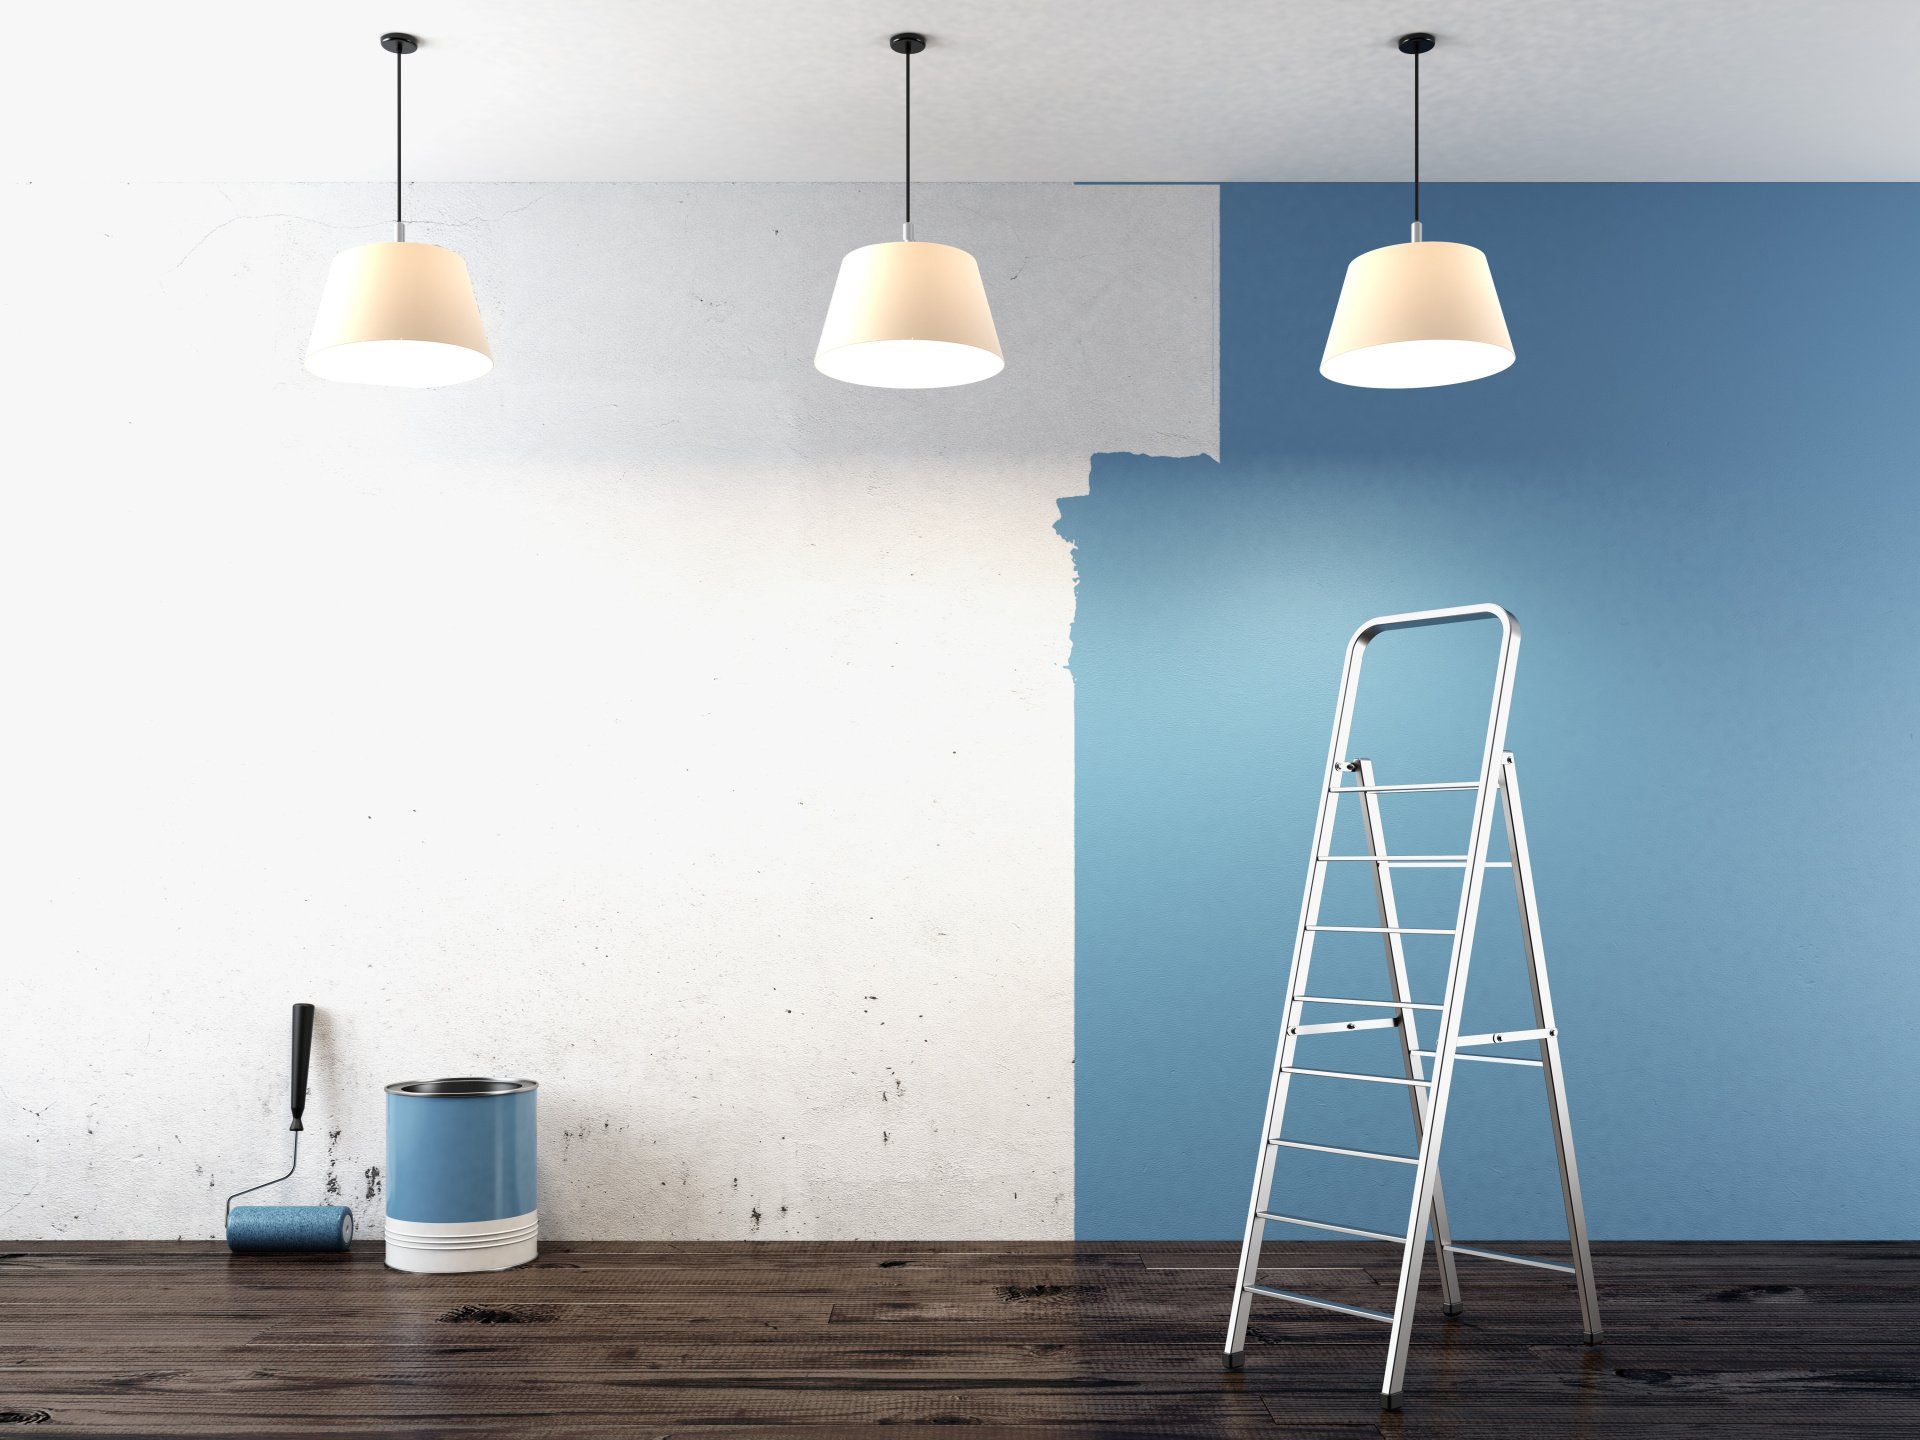 A room is being painted blue and white with a ladder in the foreground.